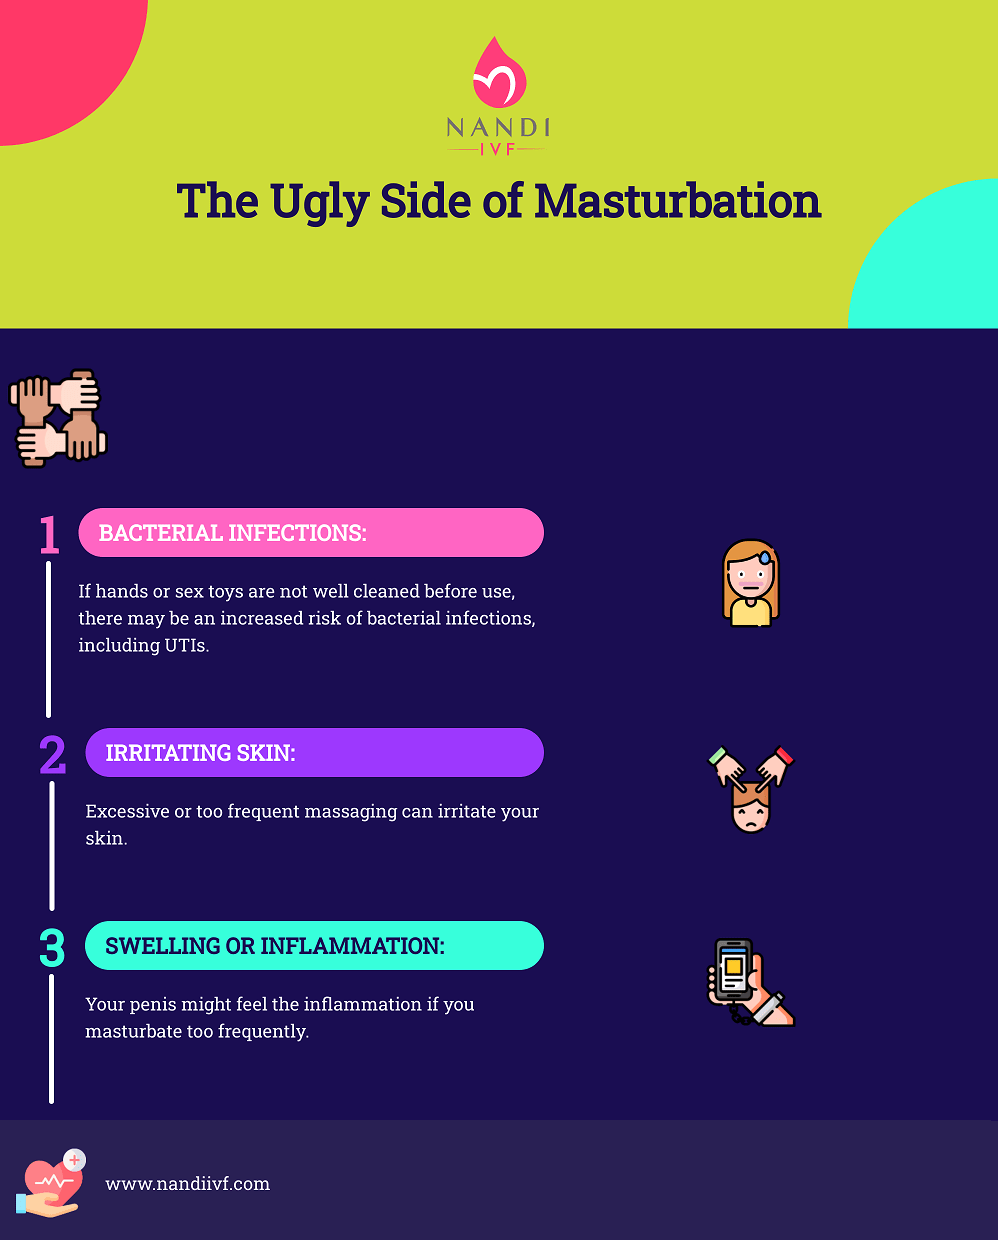 The Ugly Side of Masturbation